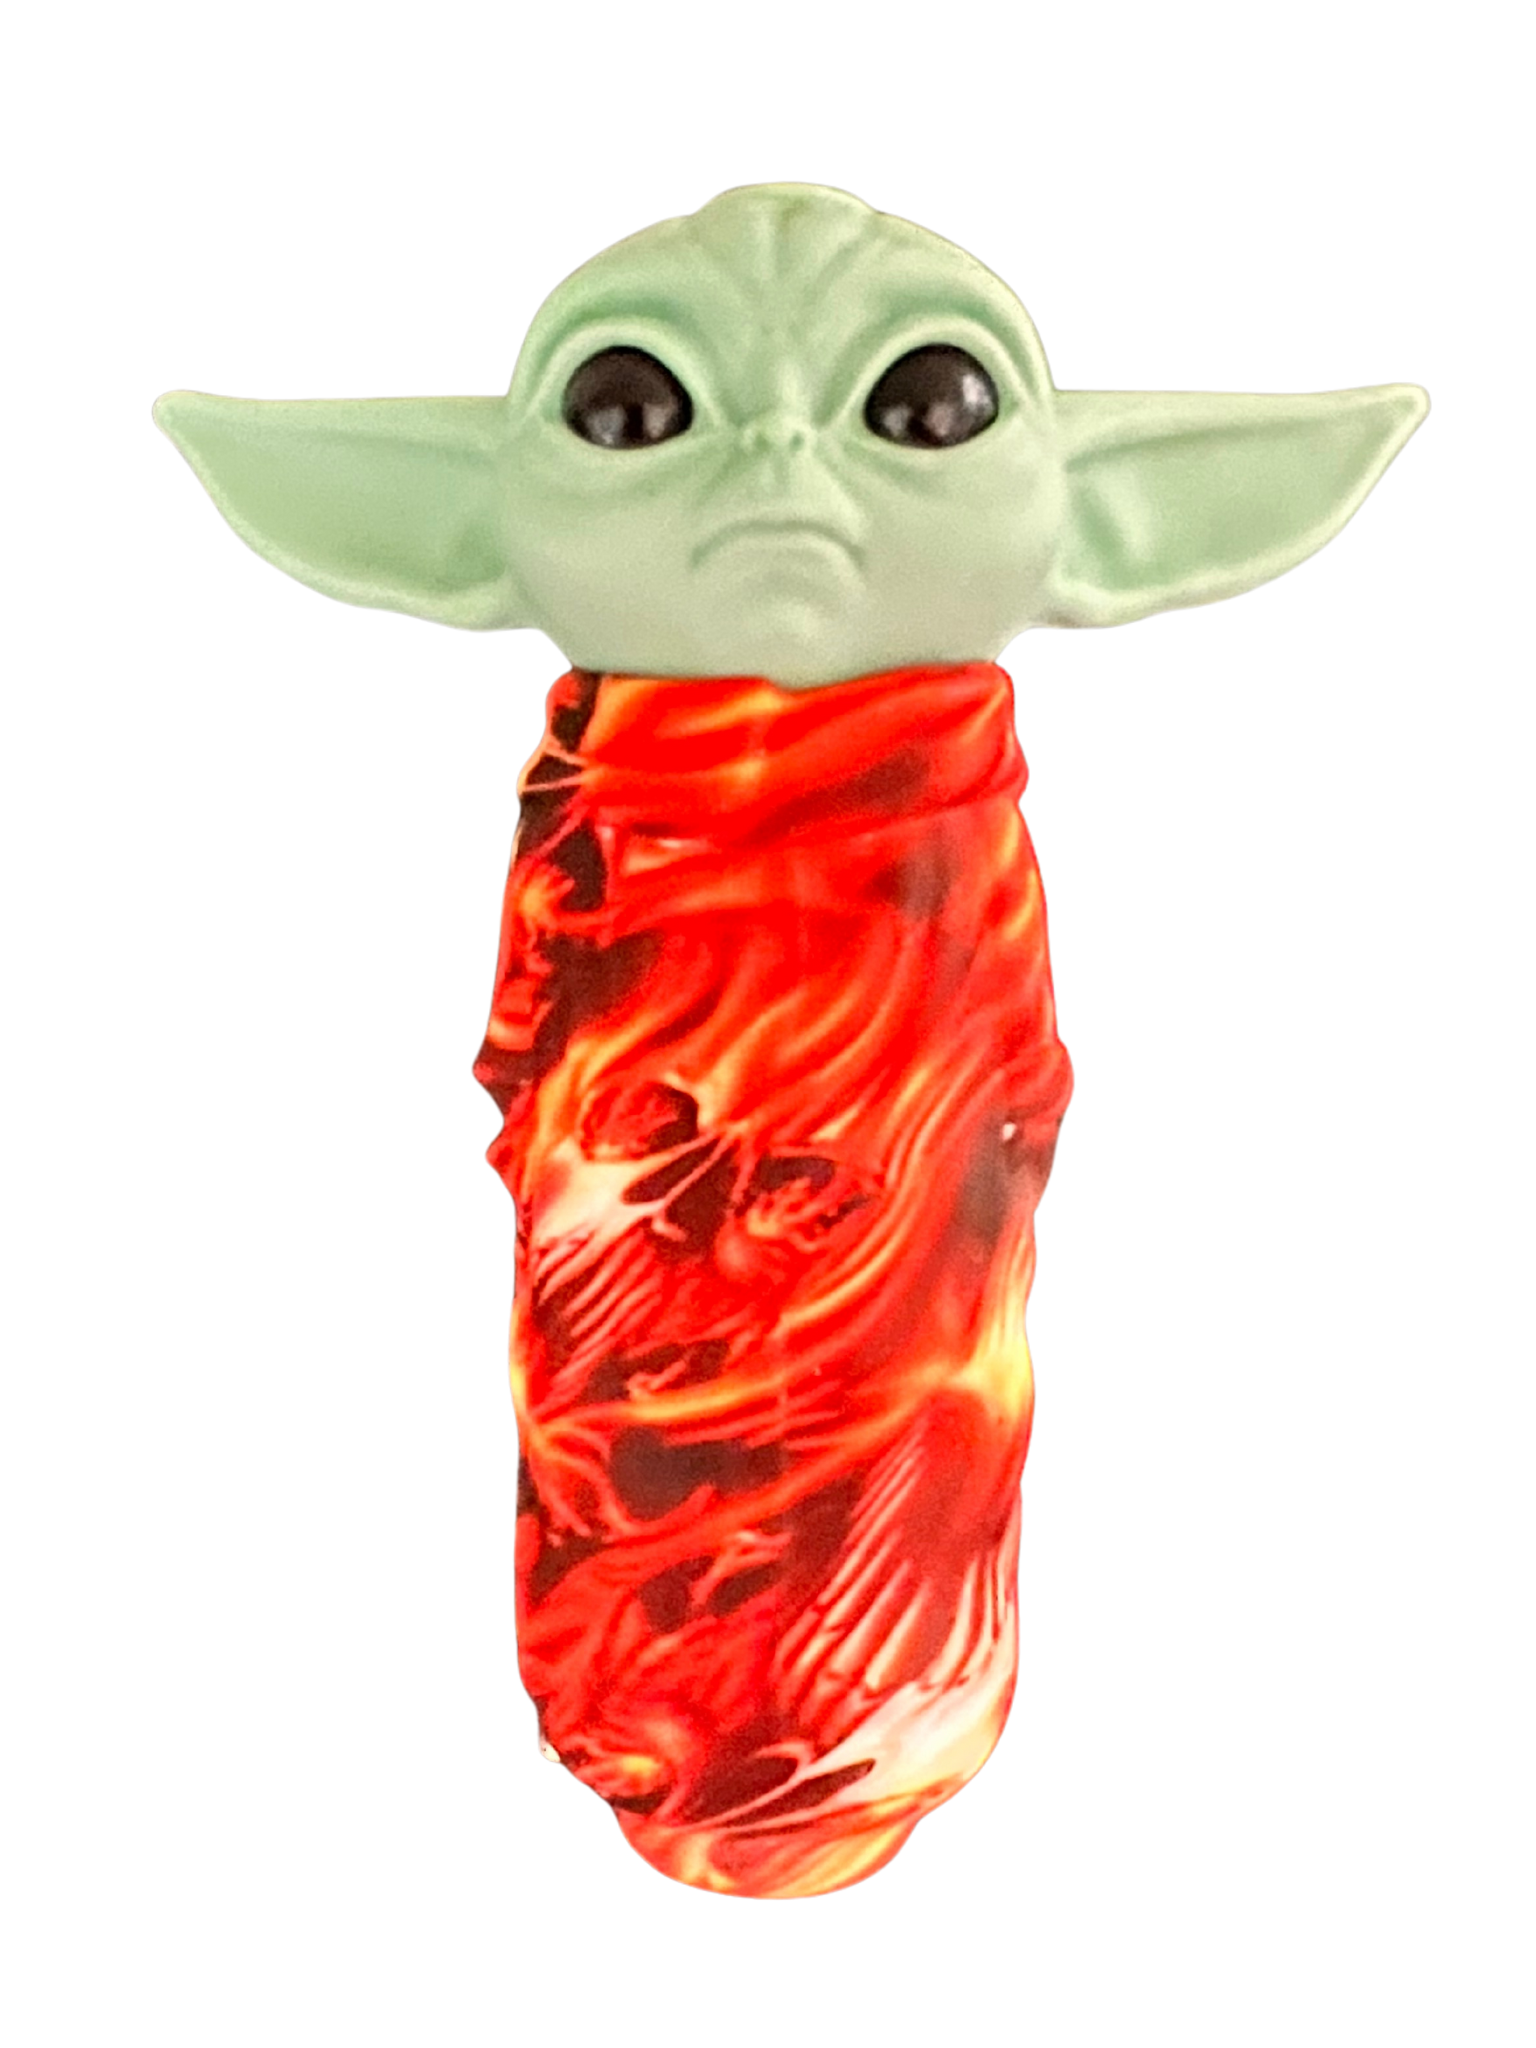 Silicone Baby Yoda Hand Pipe with Glass Bowl Simply CBD LLC